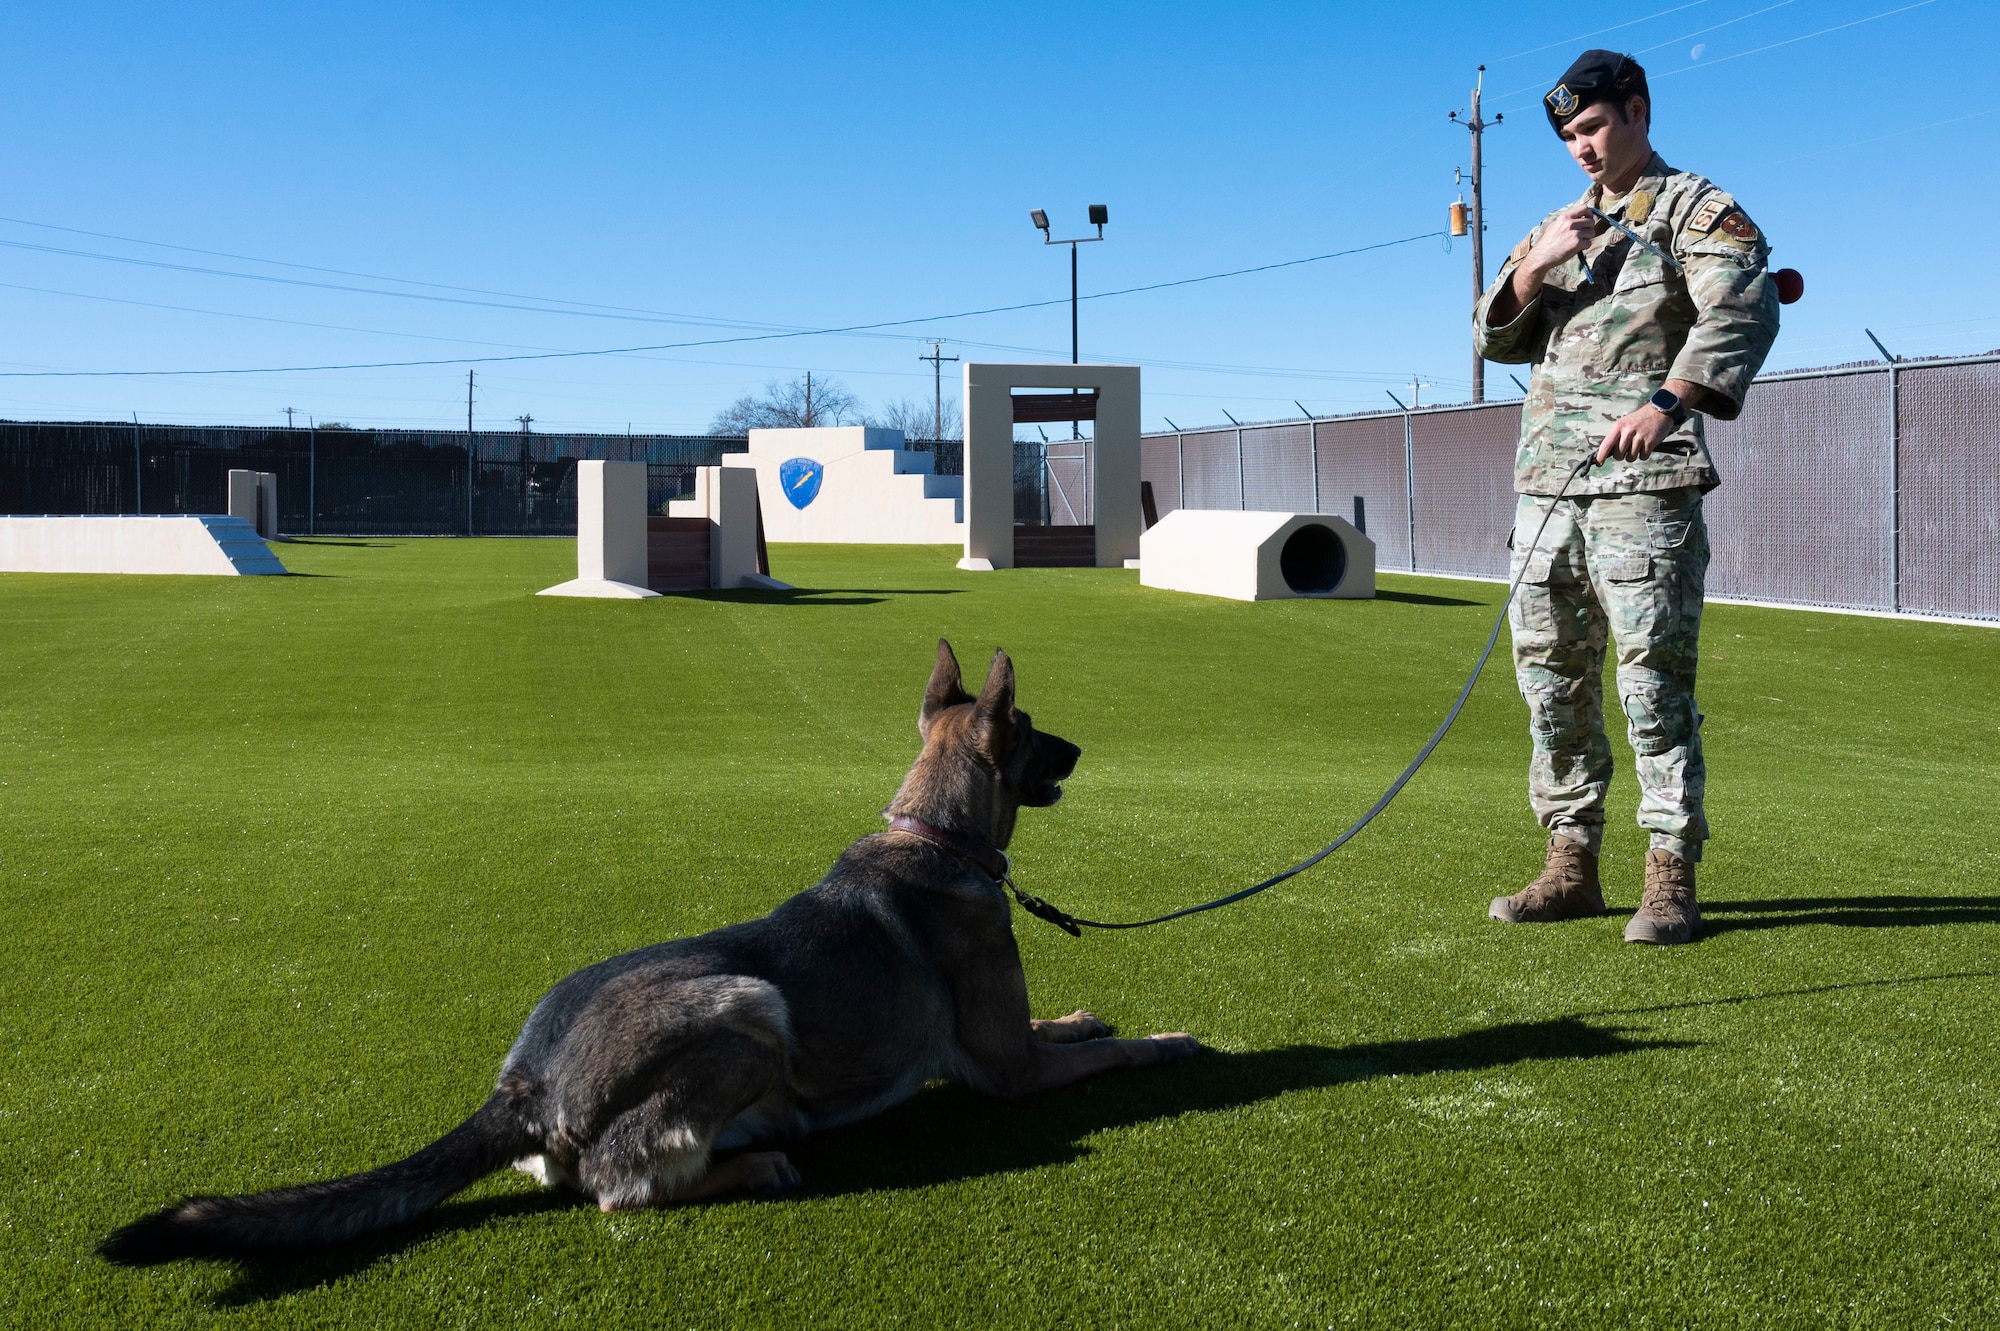 U.S. Air Force Staff Sgt. Charles Gaines, 47th Security Forces Squadron military working dog trainer, instructs Tuko, a military working dog, to follow basic commands at the 47th Security Forces Squadron military working dog training area at Laughlin Air Force Base, Texas, on Jan. 13, 2023. Military working dogs provide a variety of services, including the detection of explosives and drug searches, tracking of personnel and suspects, patrol of restricted areas, and protection of military installations. (U.S. Air Force photo by Airman 1st Class Kailee Reynolds)